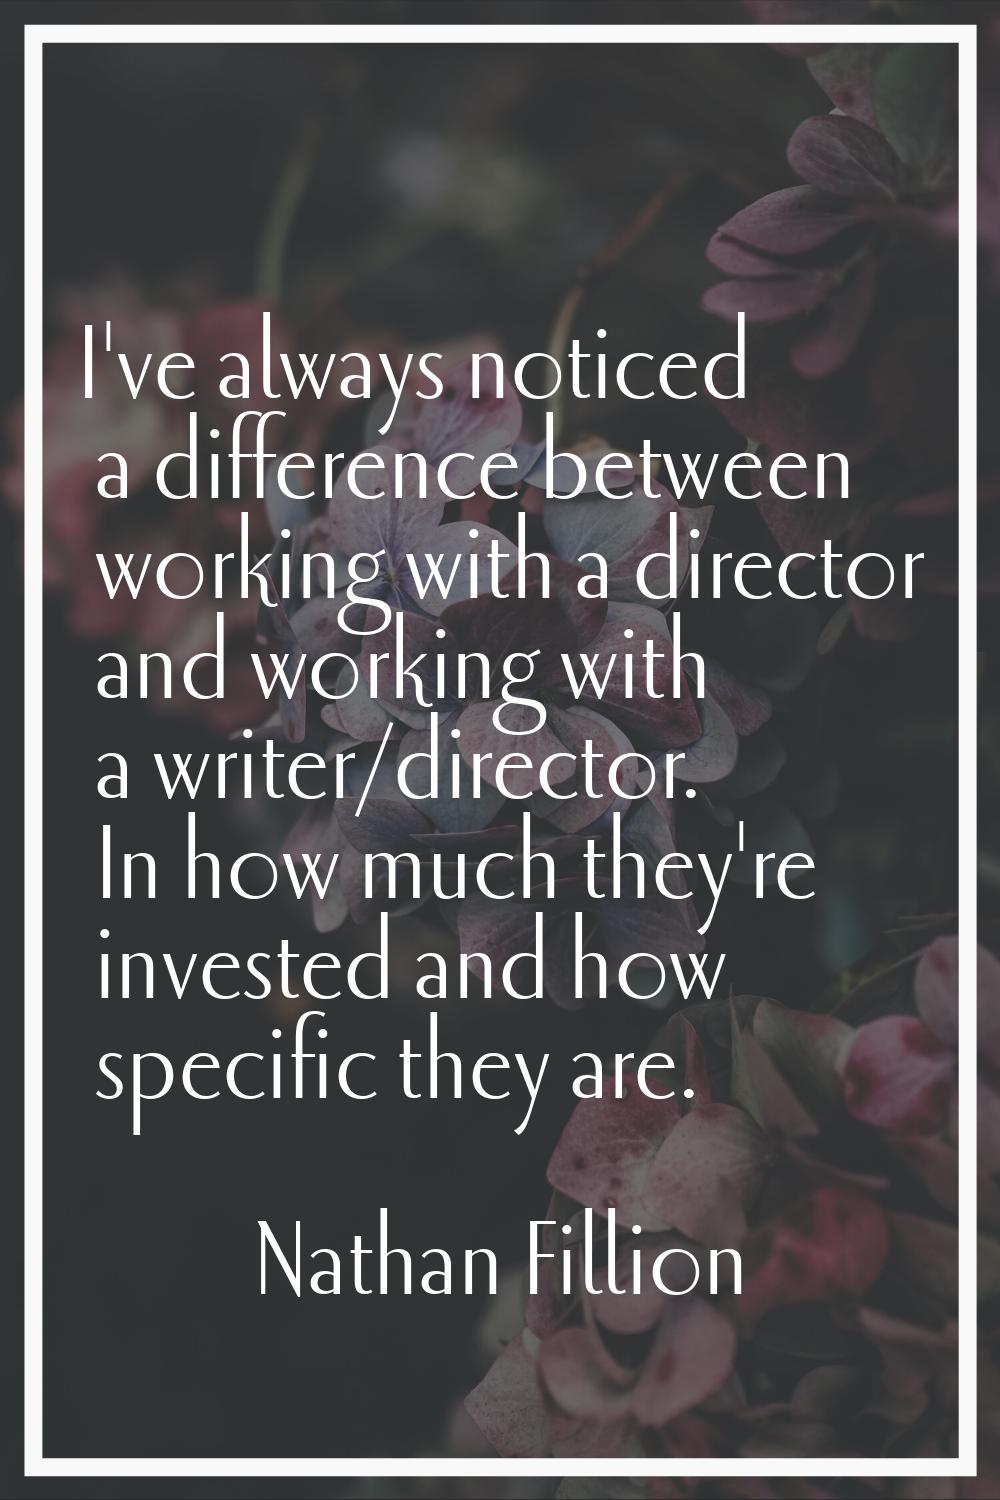 I've always noticed a difference between working with a director and working with a writer/director